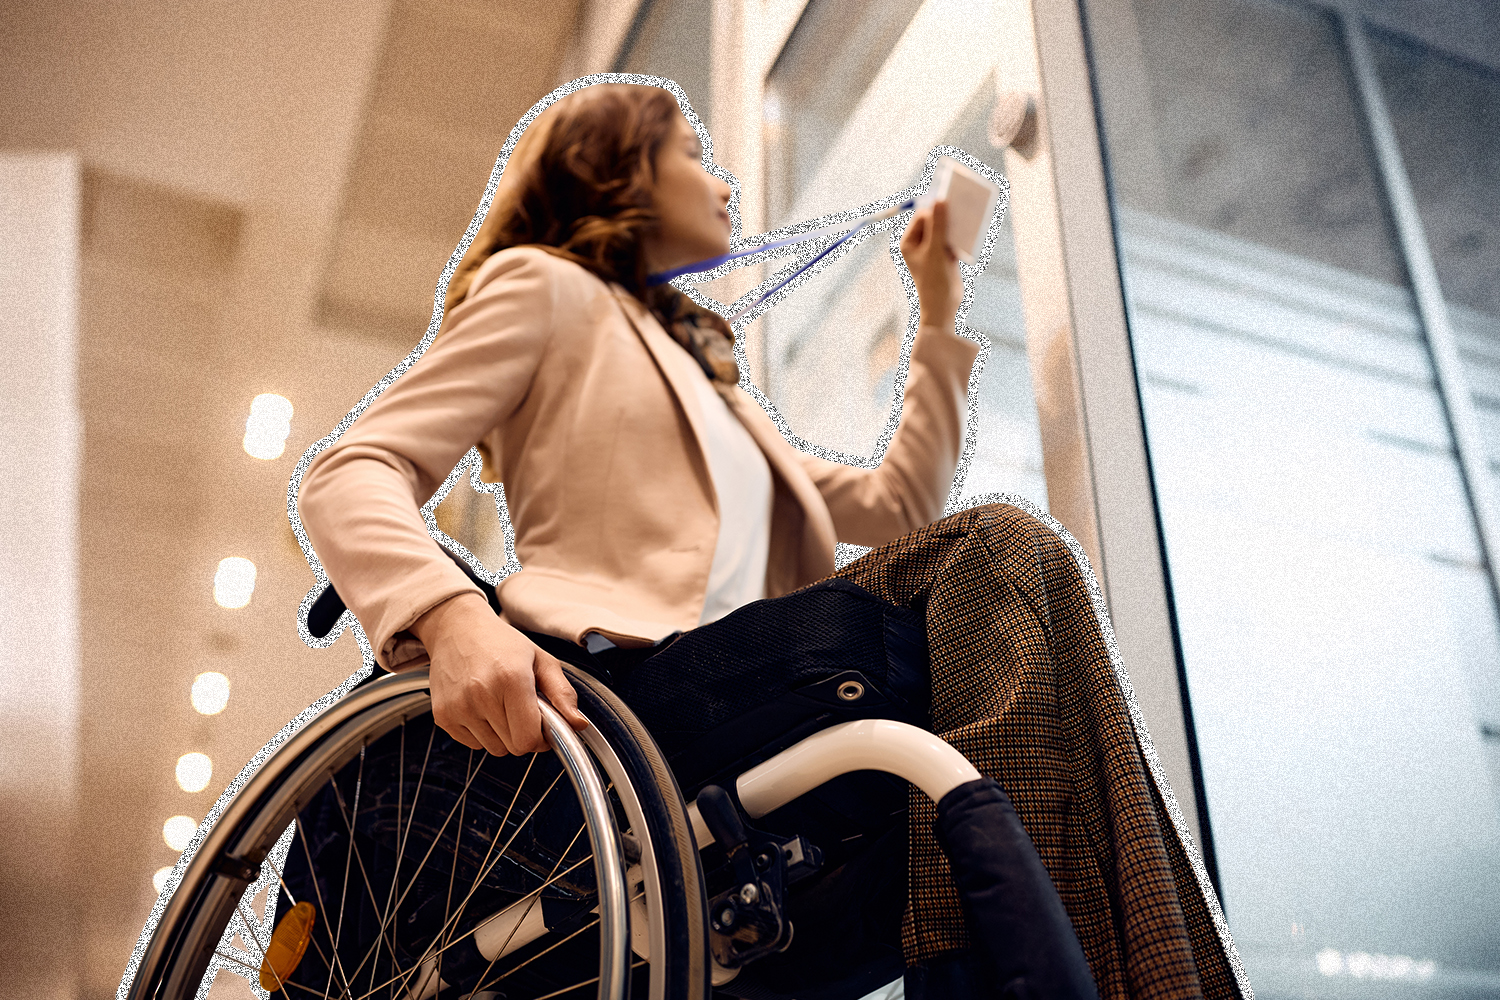 A woman in a wheelchair scanning a company badge to enter the door to an office.